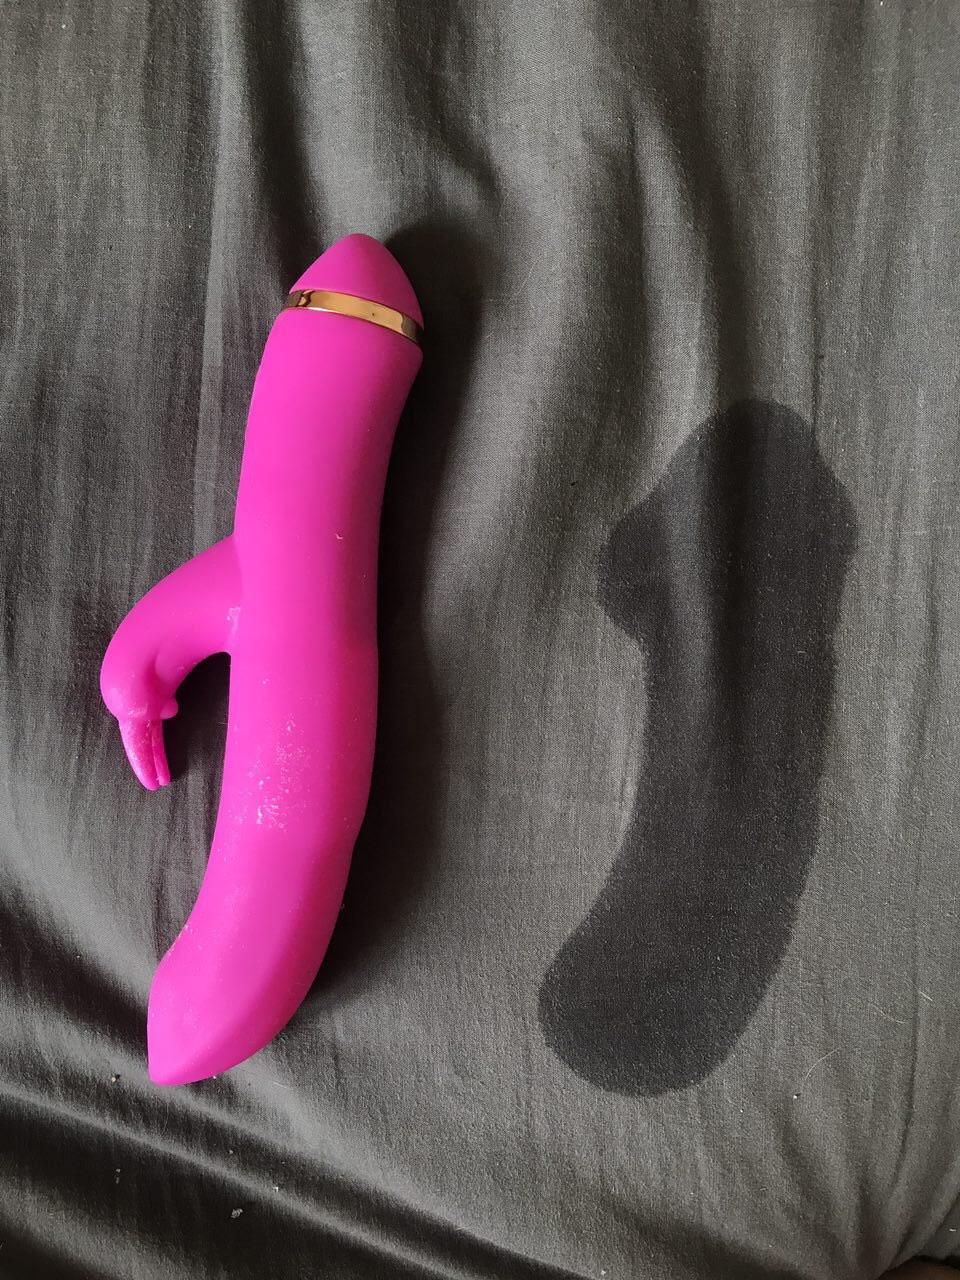 Squirt Mark After Masturbating Was The Perfect Shape